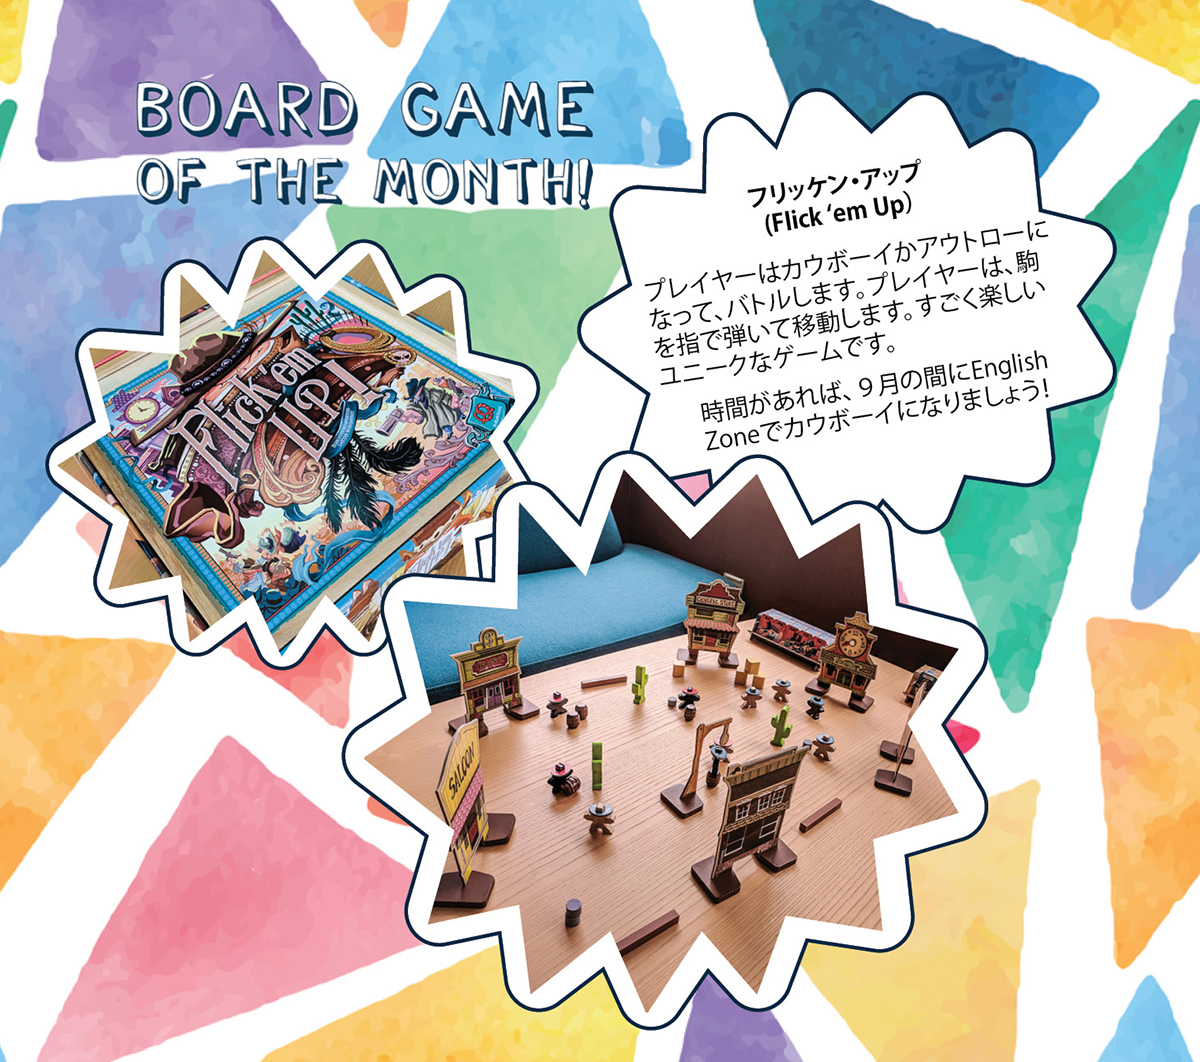 Board%20game%20of%20the%20month%20for%20blog.jpg